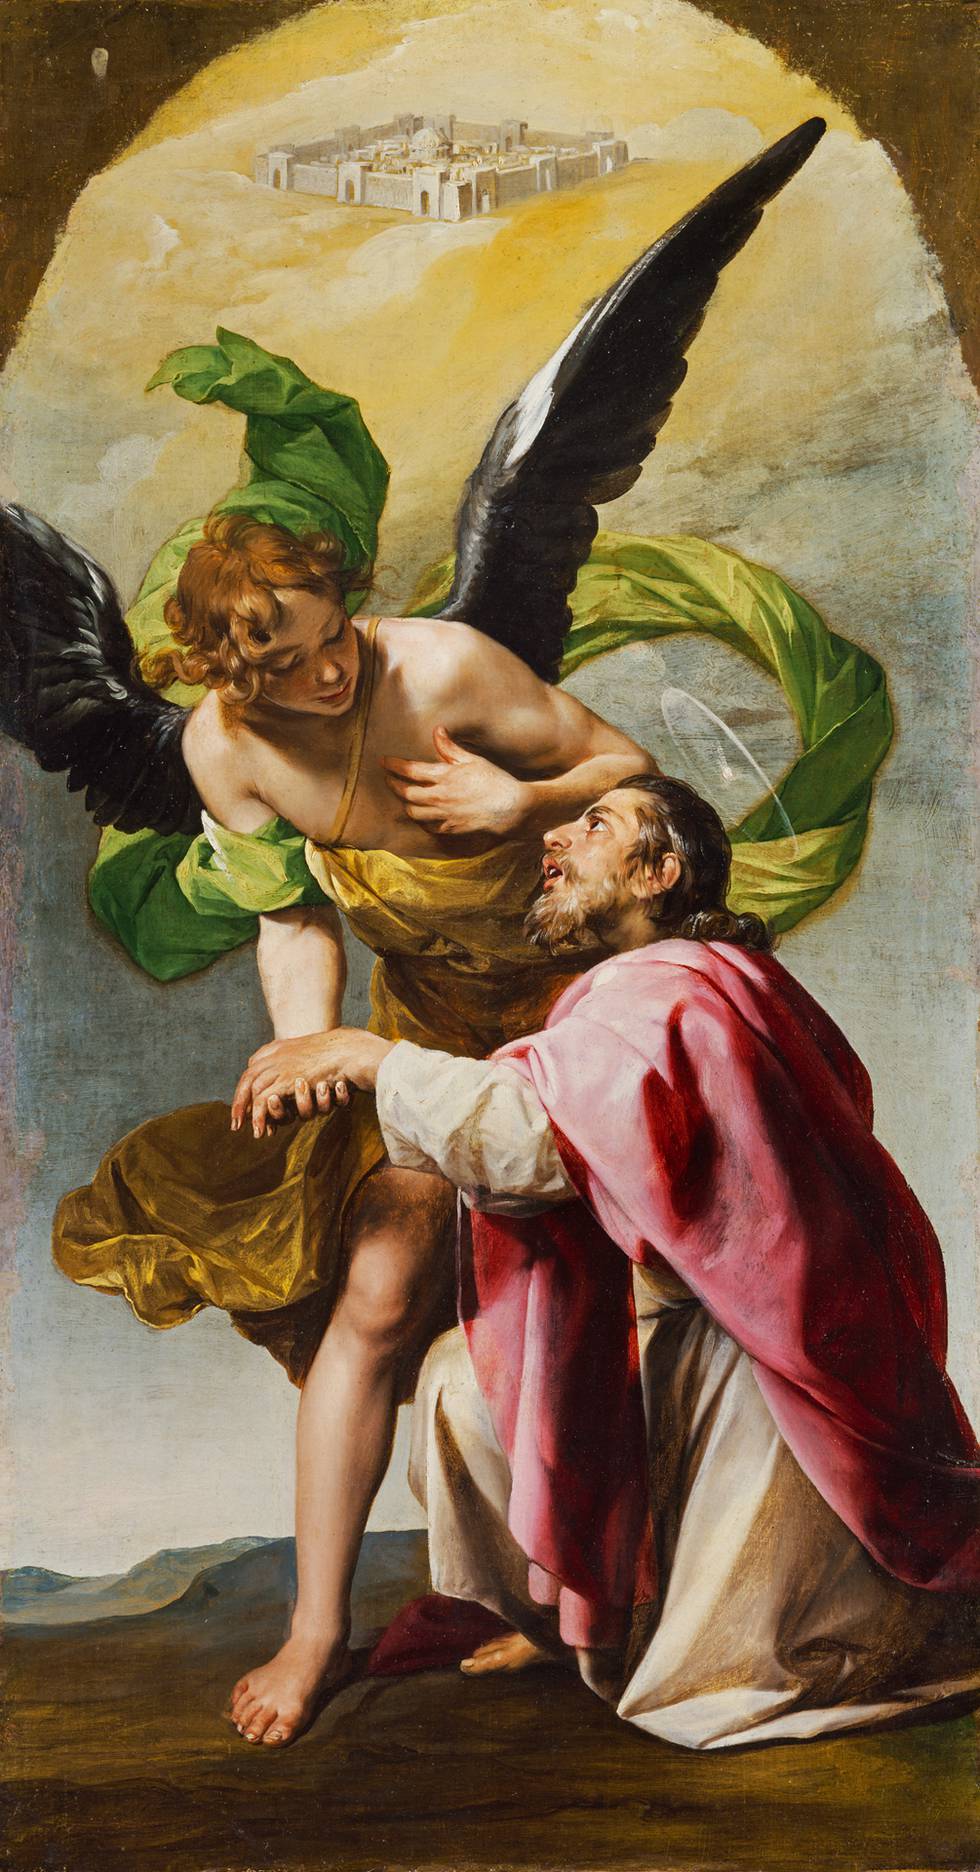 Angel guides man who kneels in front of him